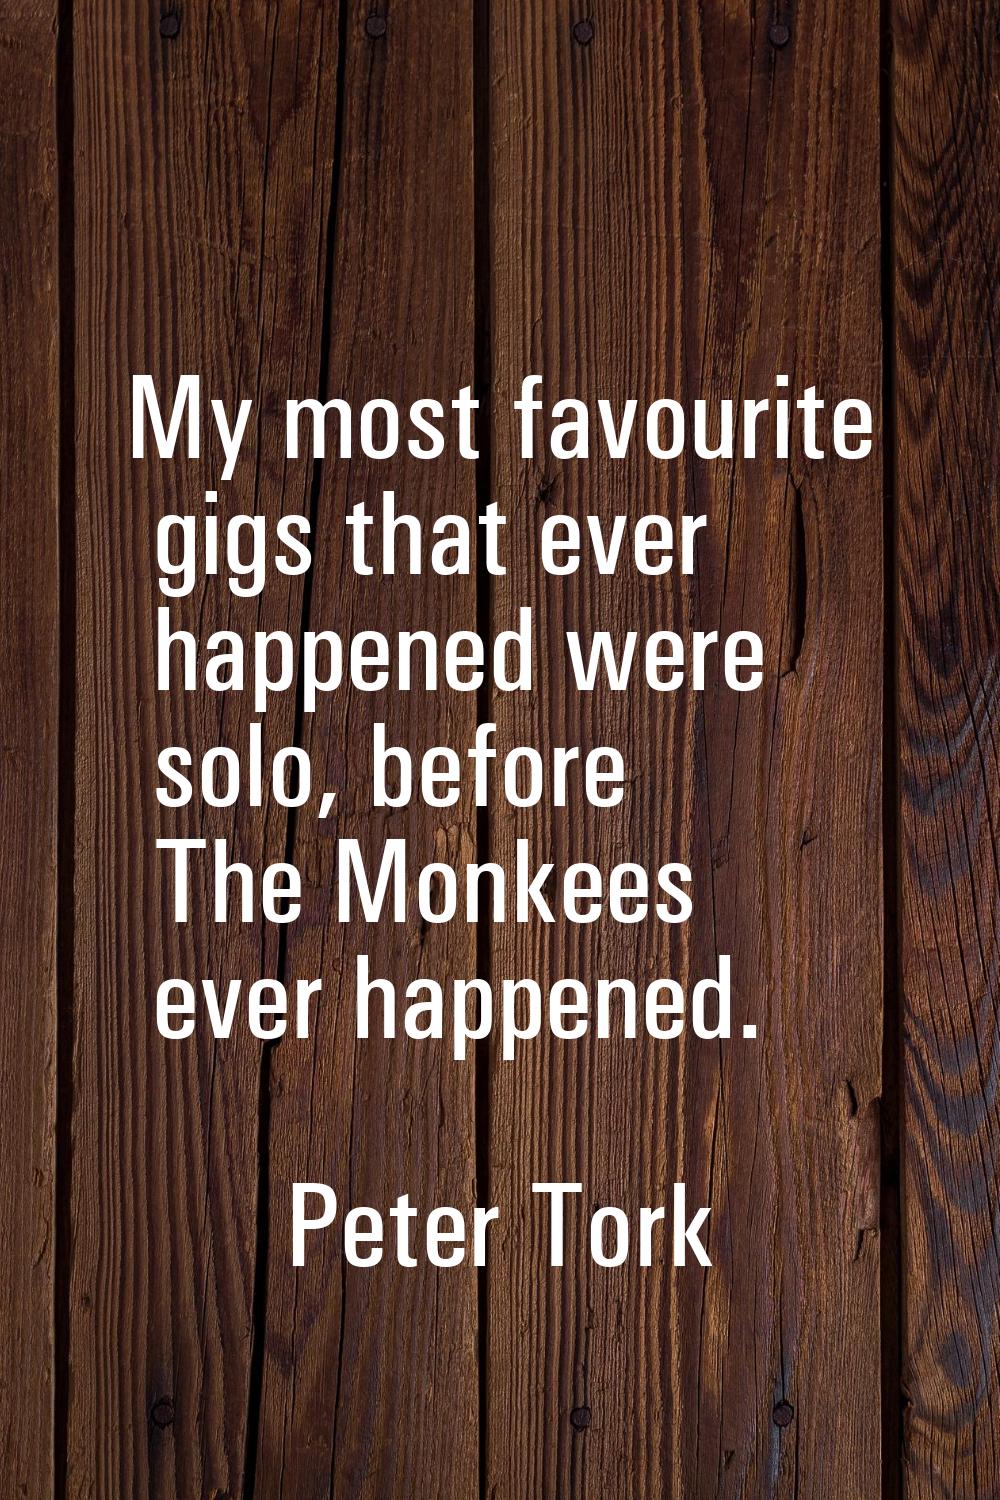 My most favourite gigs that ever happened were solo, before The Monkees ever happened.